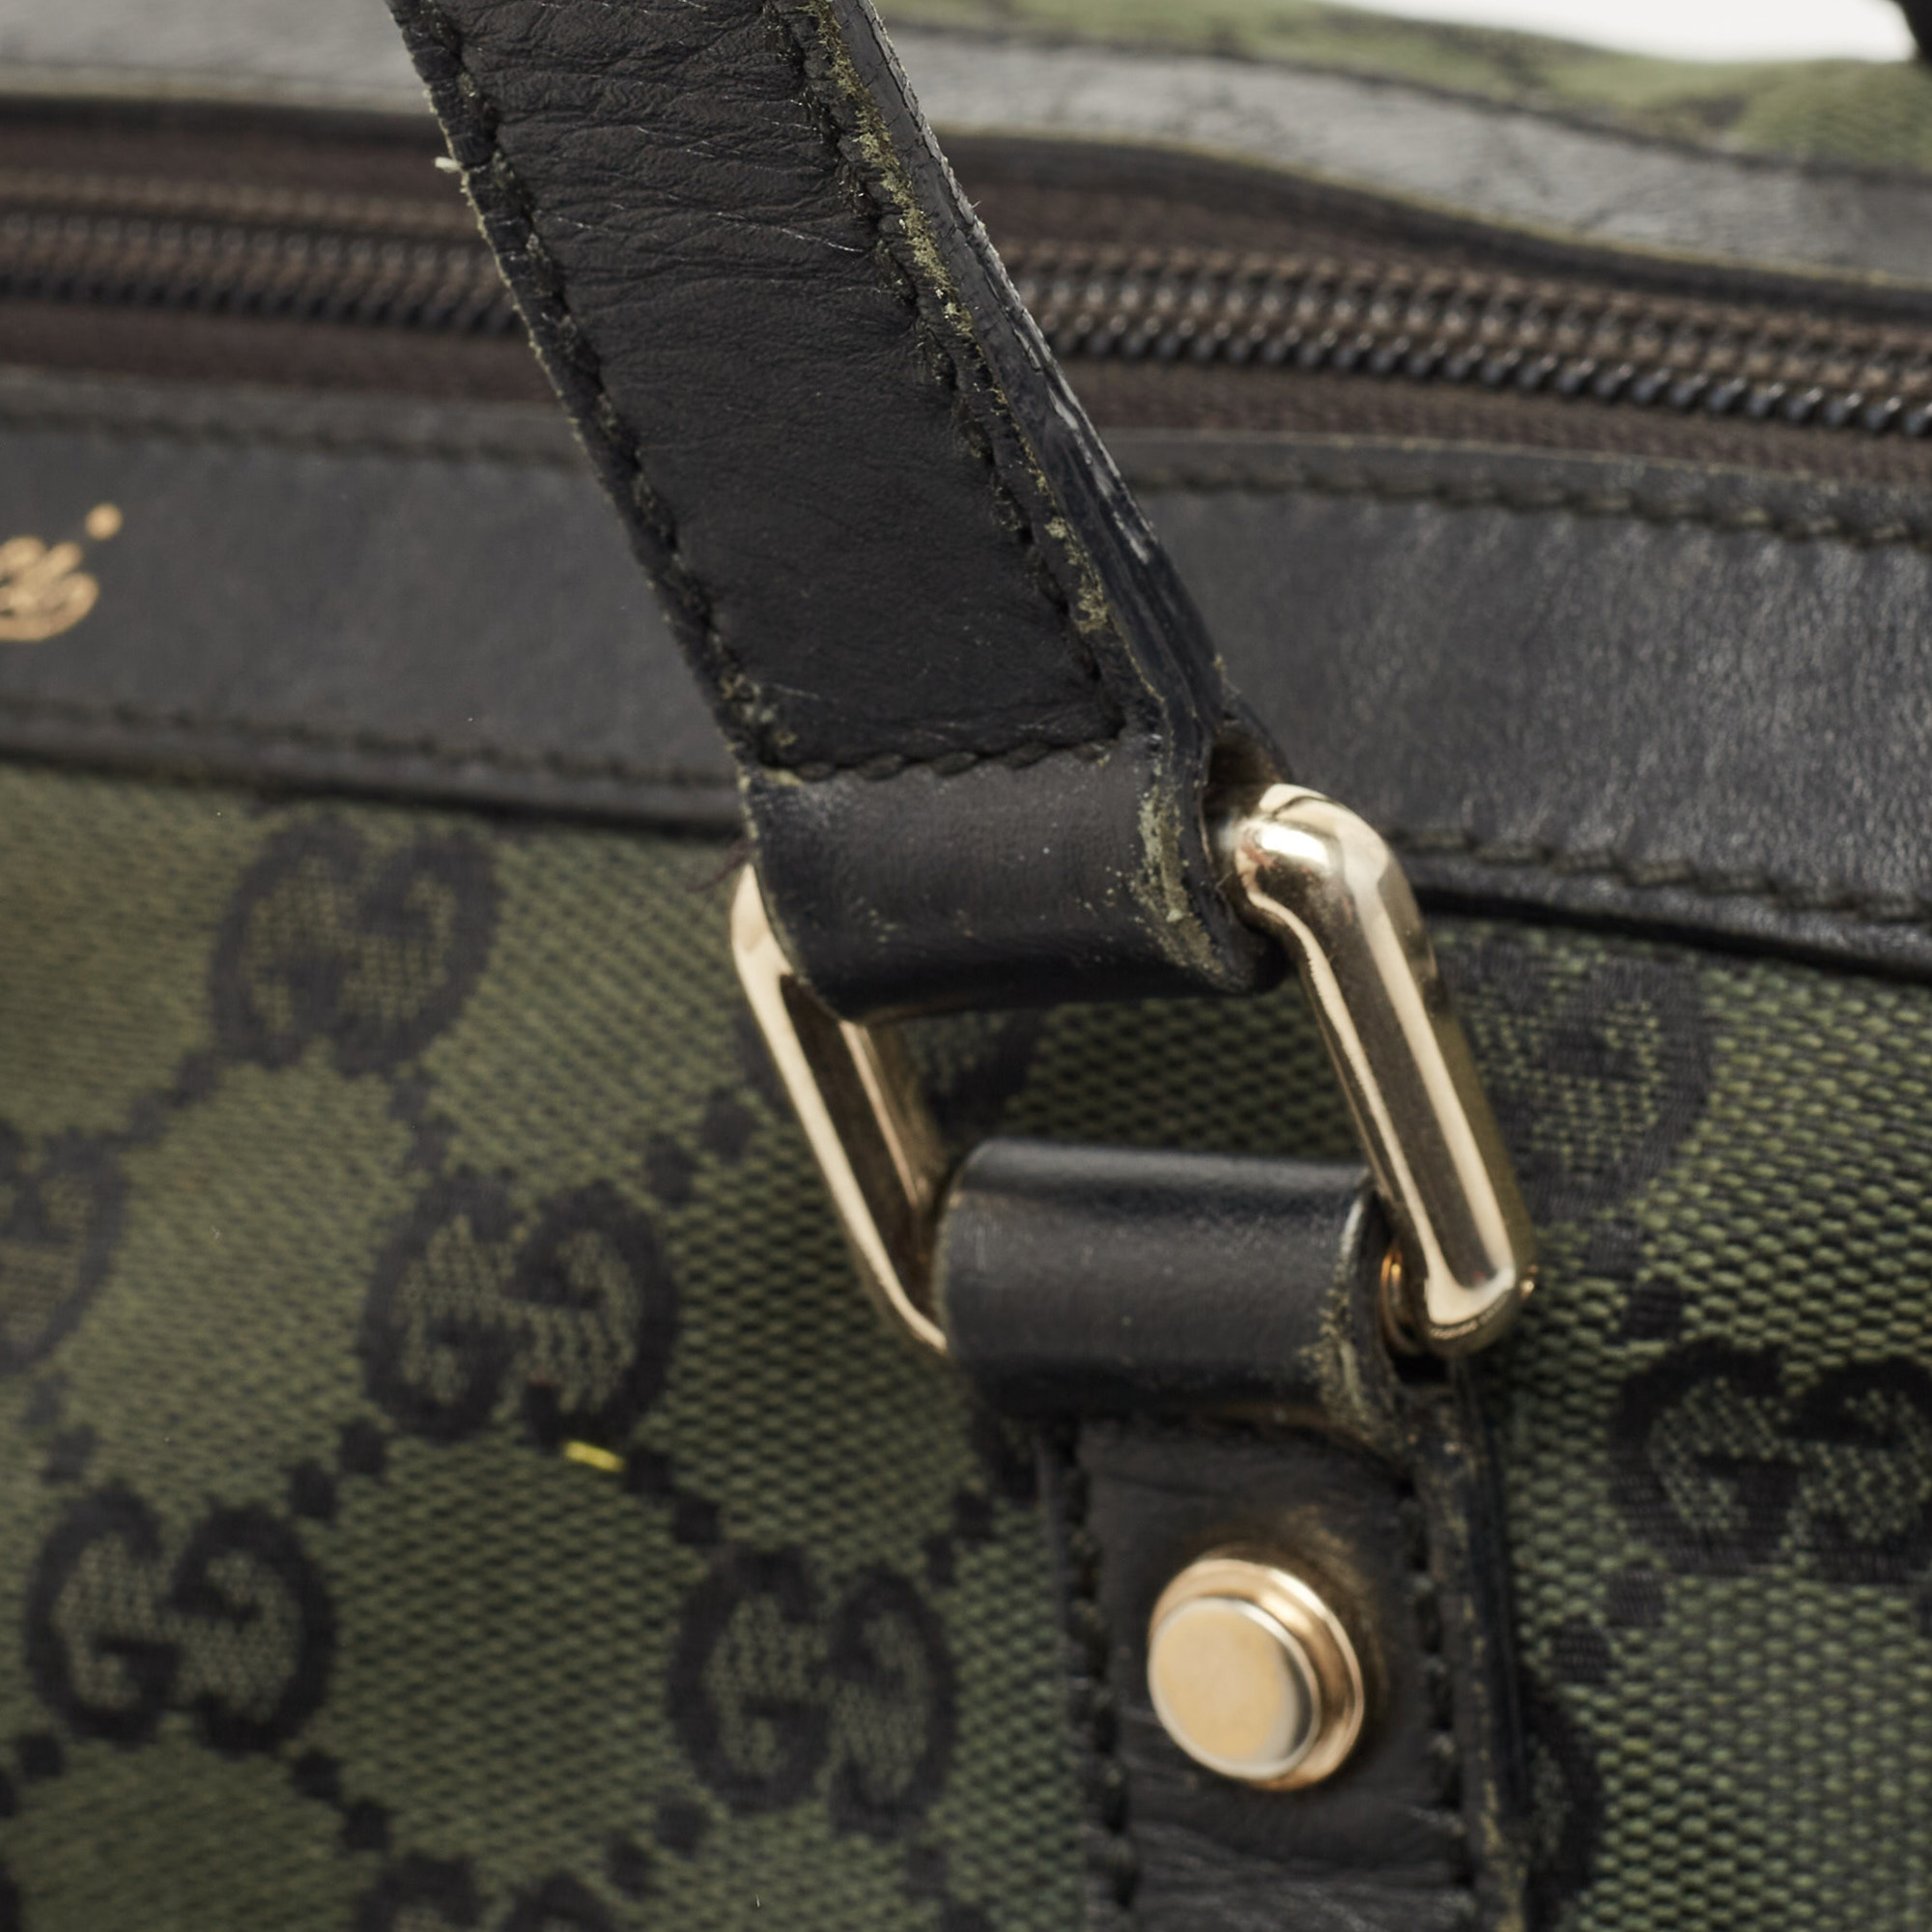 Gucci Black/Green GG Canvas And Leather Canvas Medium Abbey Tote